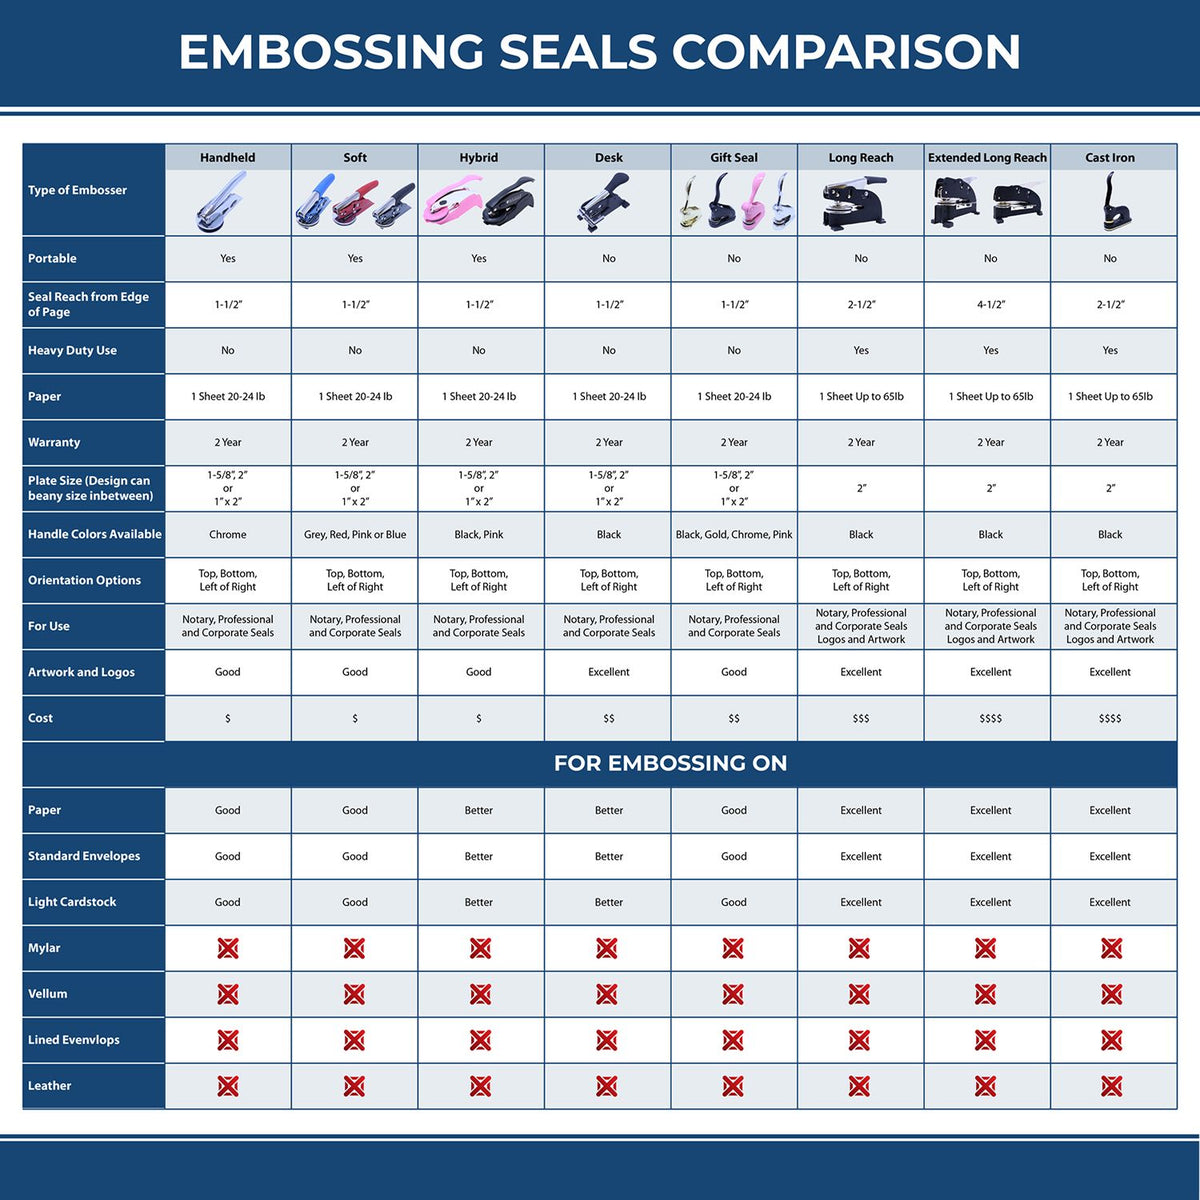 A comparison chart for the different types of mount models available for the Extended Long Reach Alaska Surveyor Embosser.